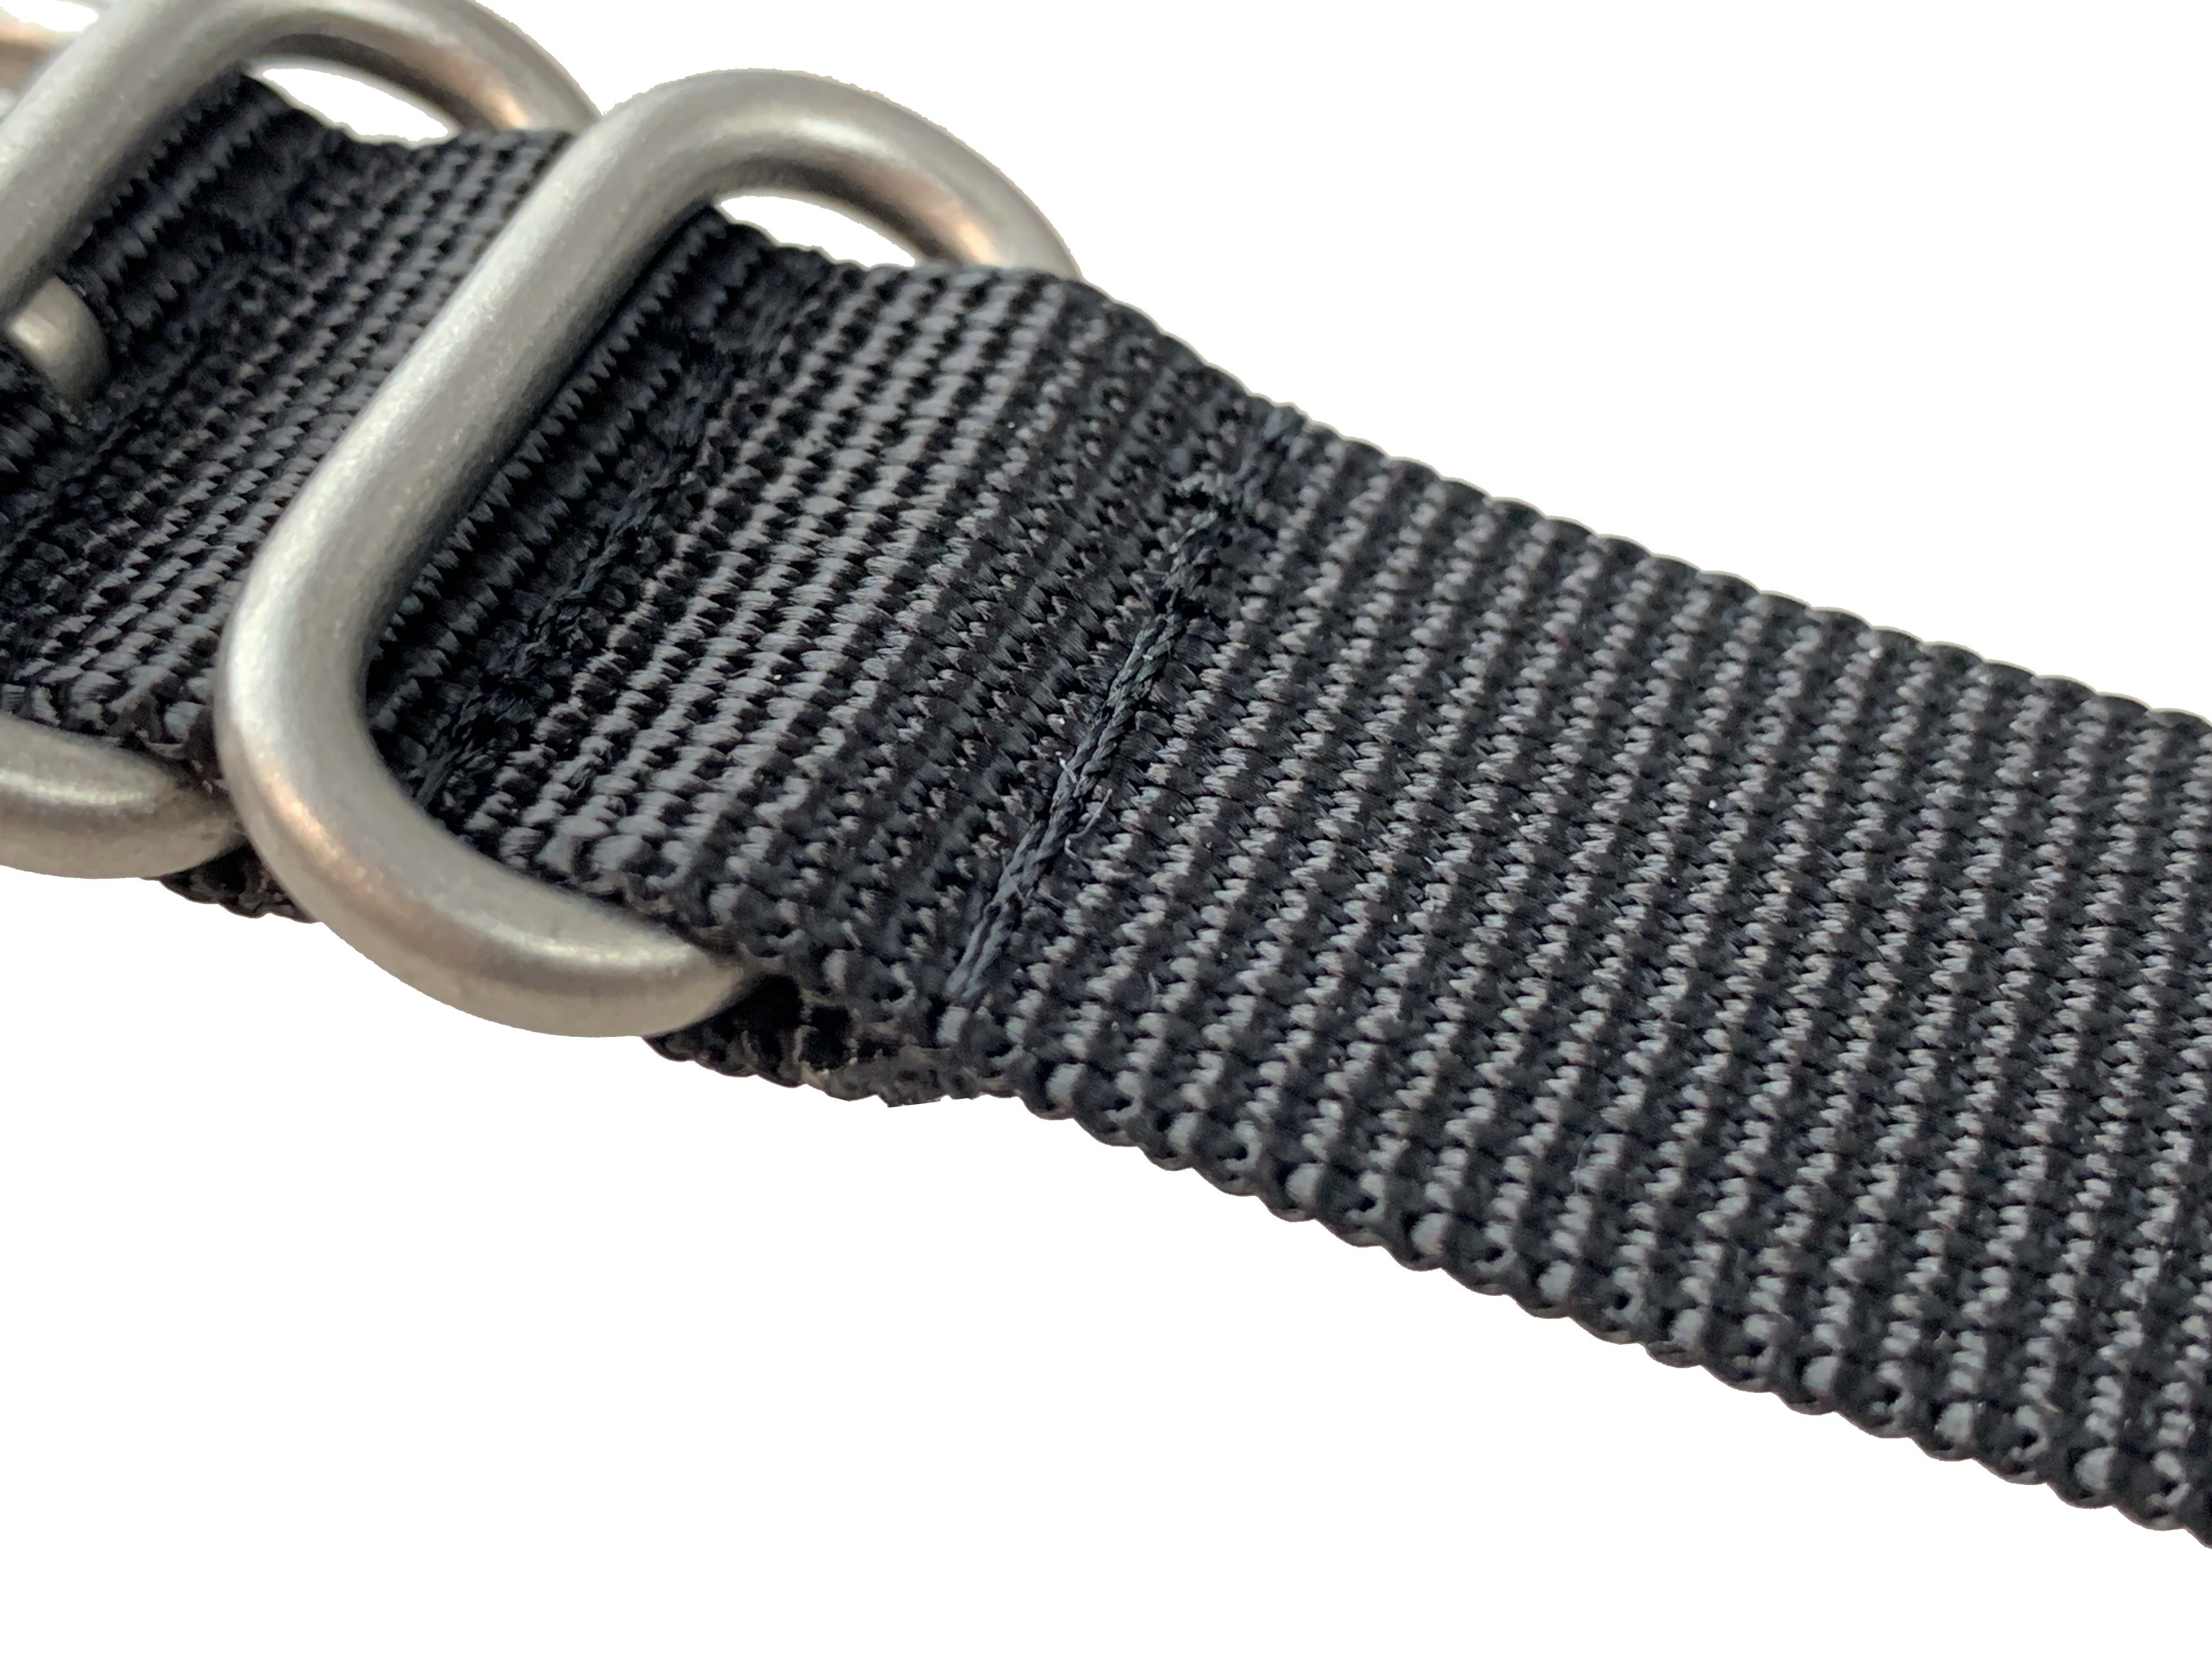 Nylon NATO and ZULU watch straps from StrapMania review - YouTube